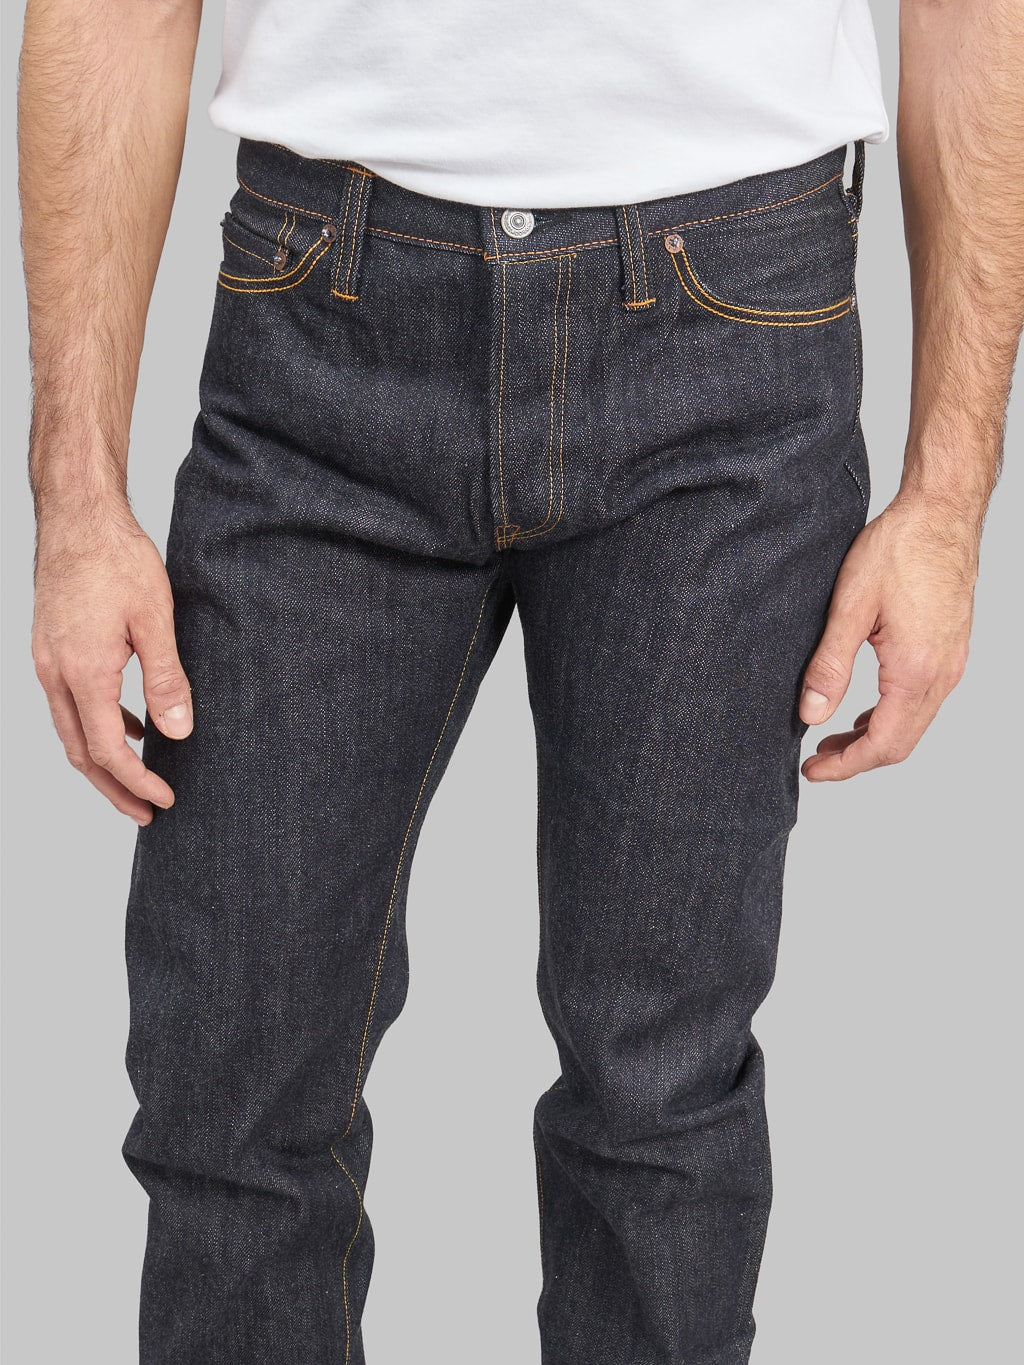 The Flat Head D306 Tight Tapered selvedge Jeans inseam